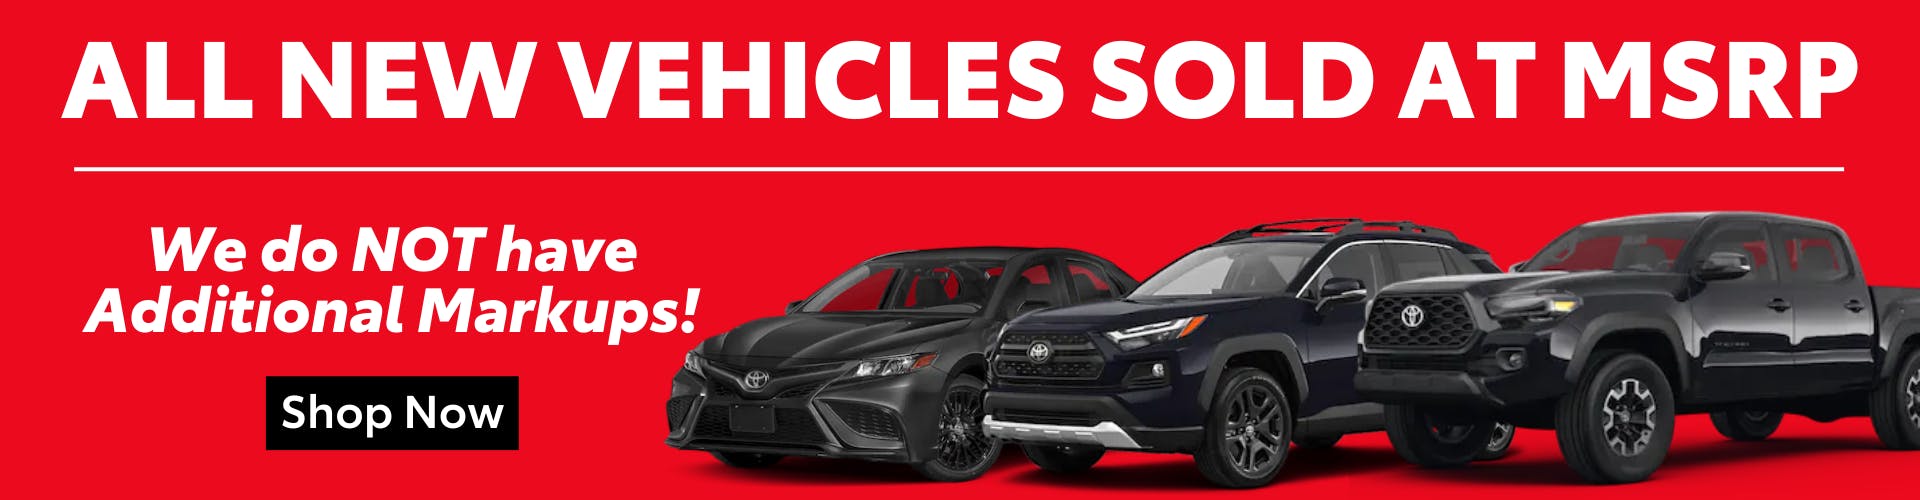 All New Vehicles Sold at MSRP